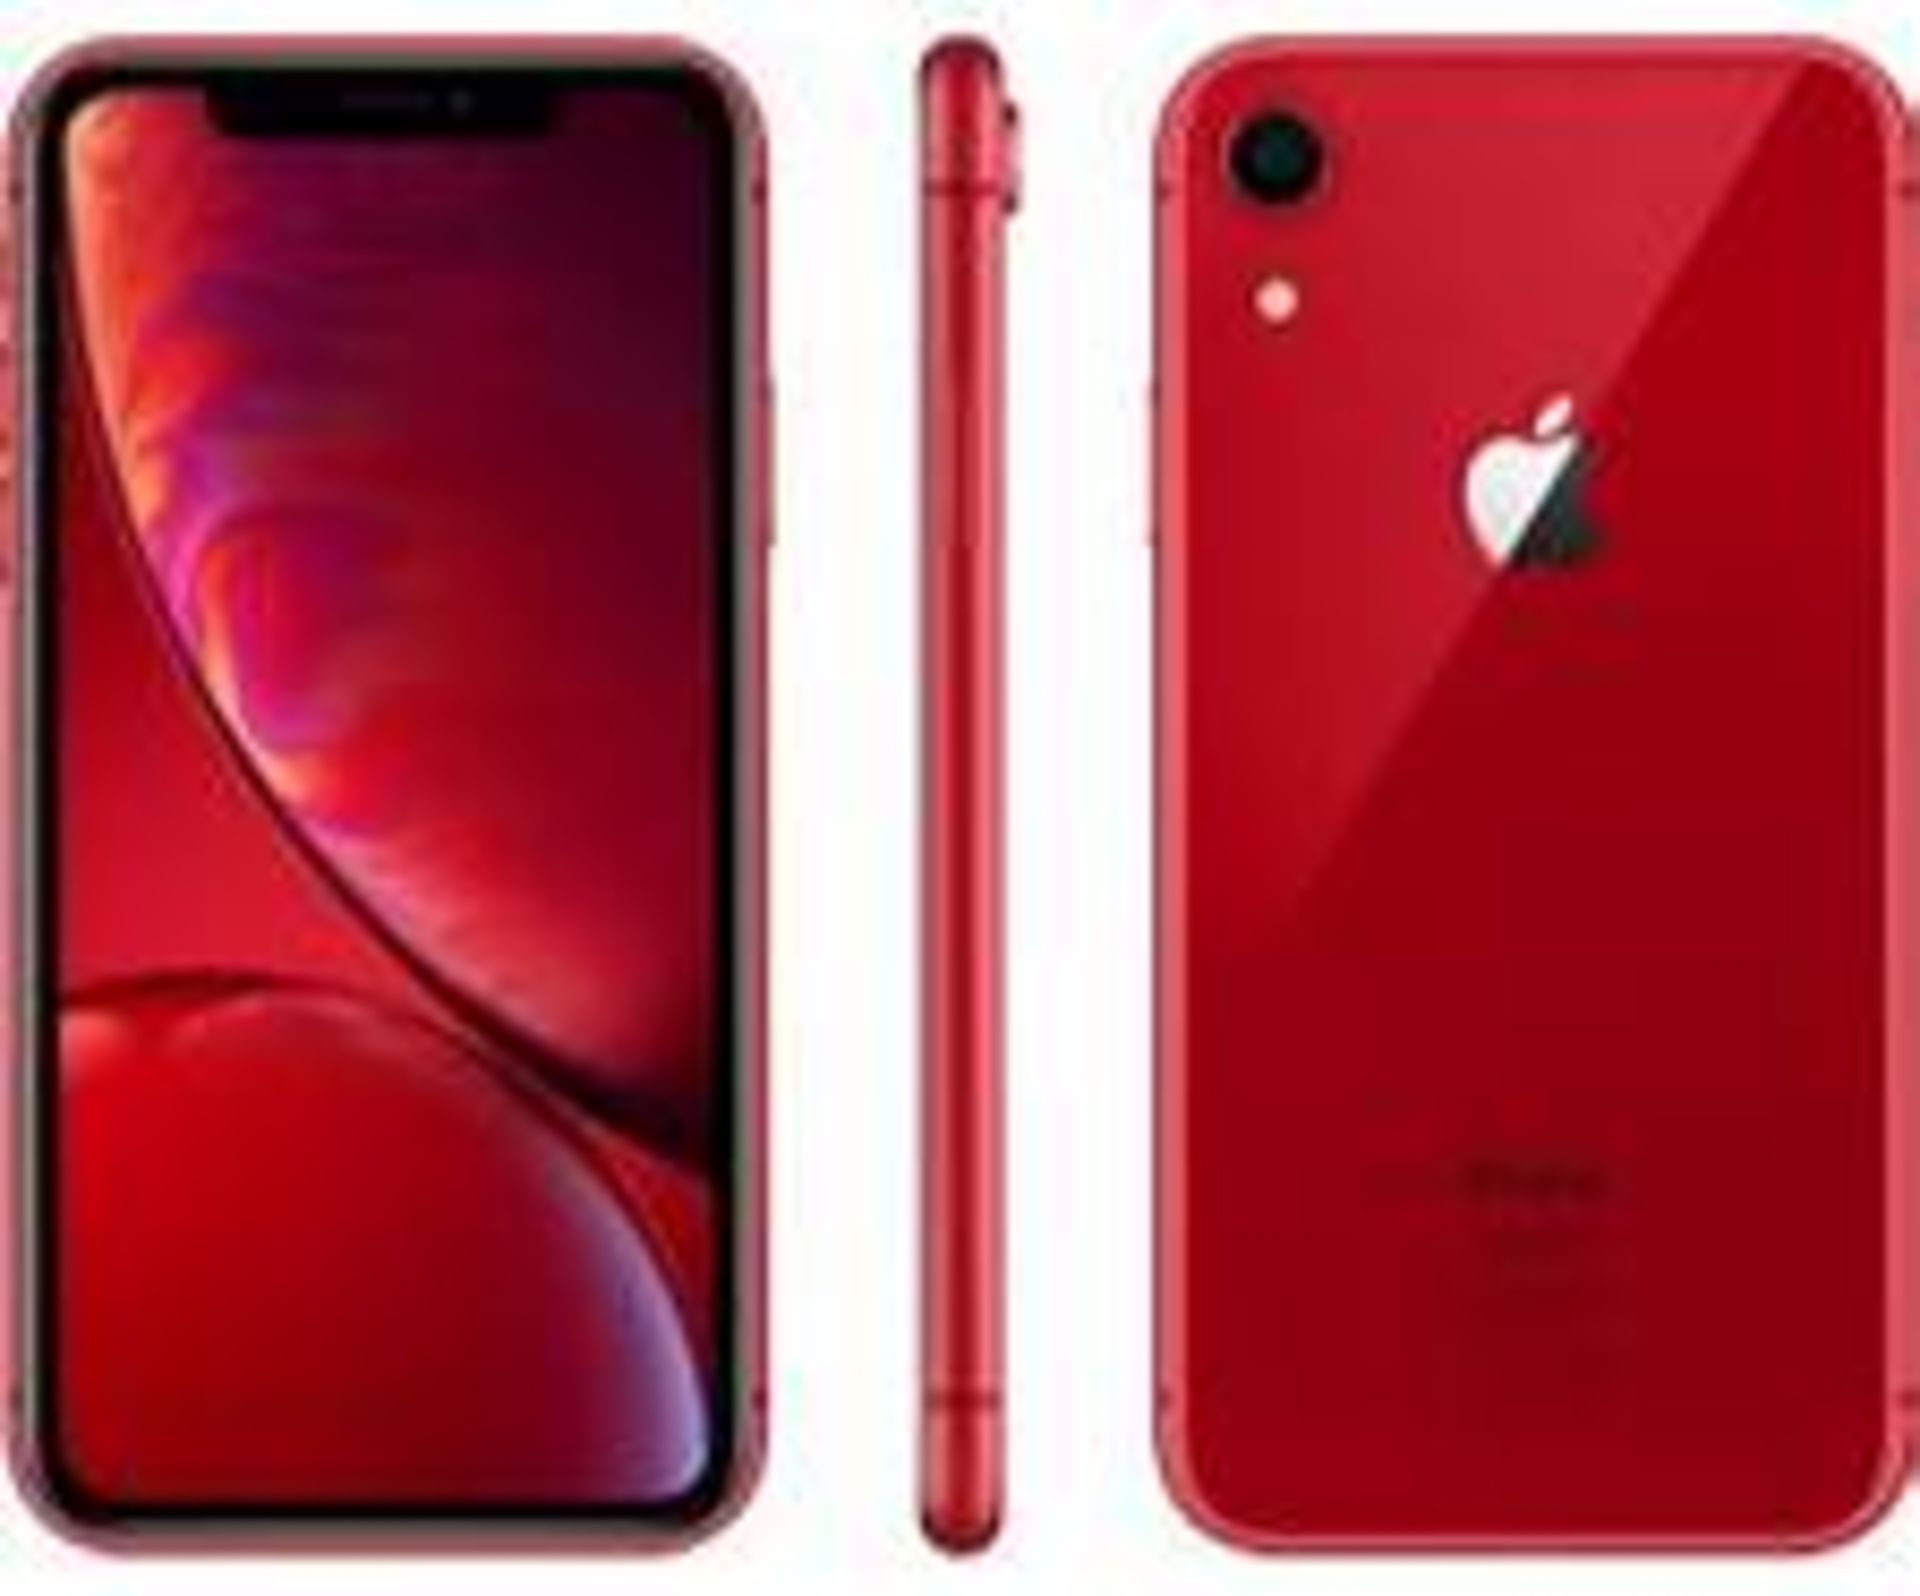 Apple iPhone XR 64GB Red. RRP £630 - Grade A - Perfect Working Condition - (Fully refurbished and